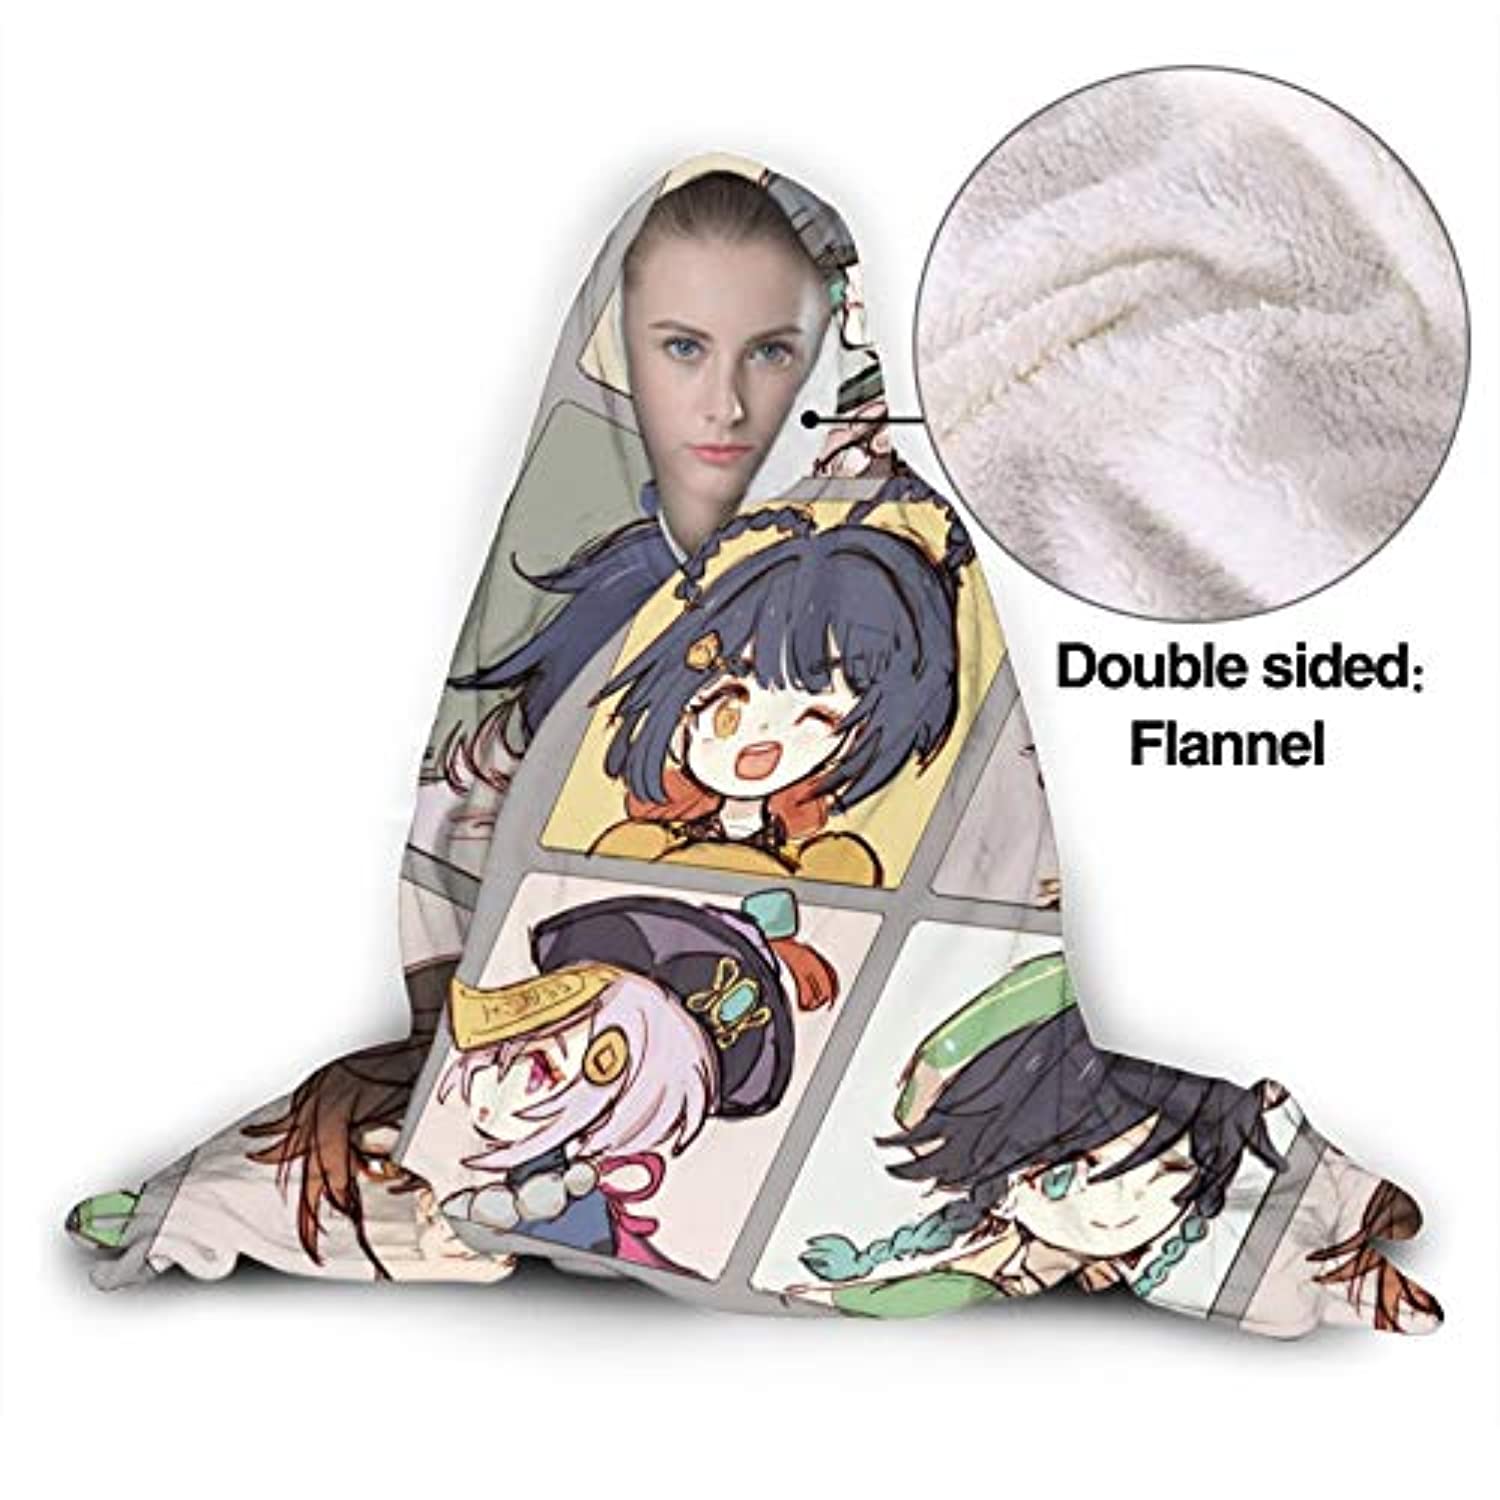 3D New ROBLOX Soft and Comfortable Nap Blanket Flannel Printed